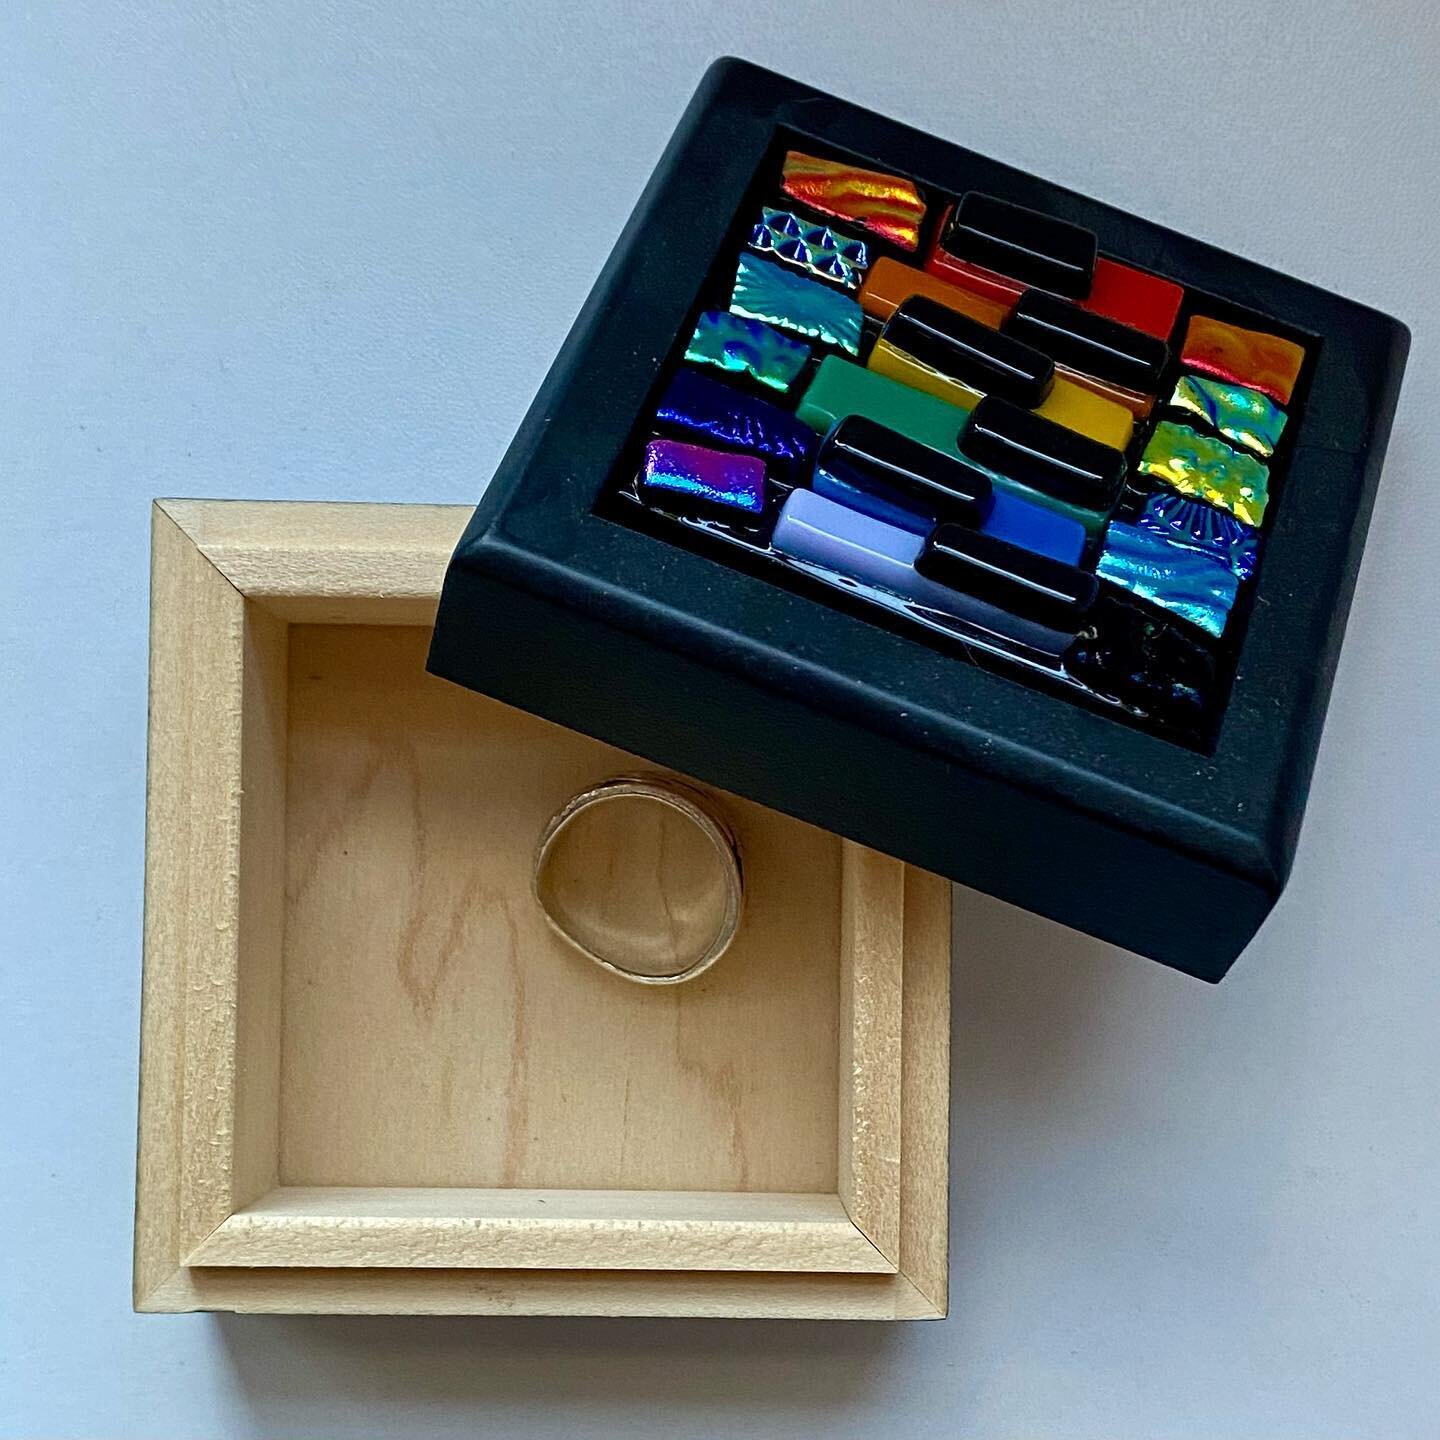 New boxes! Many sizes. Order now to receive by Christmas!  https://etsy.me/1xFnH2o #shopsmallbusiness #giftboxes #greatgifts #oneofakind #womenartists #fusedglass #chiglasscollective